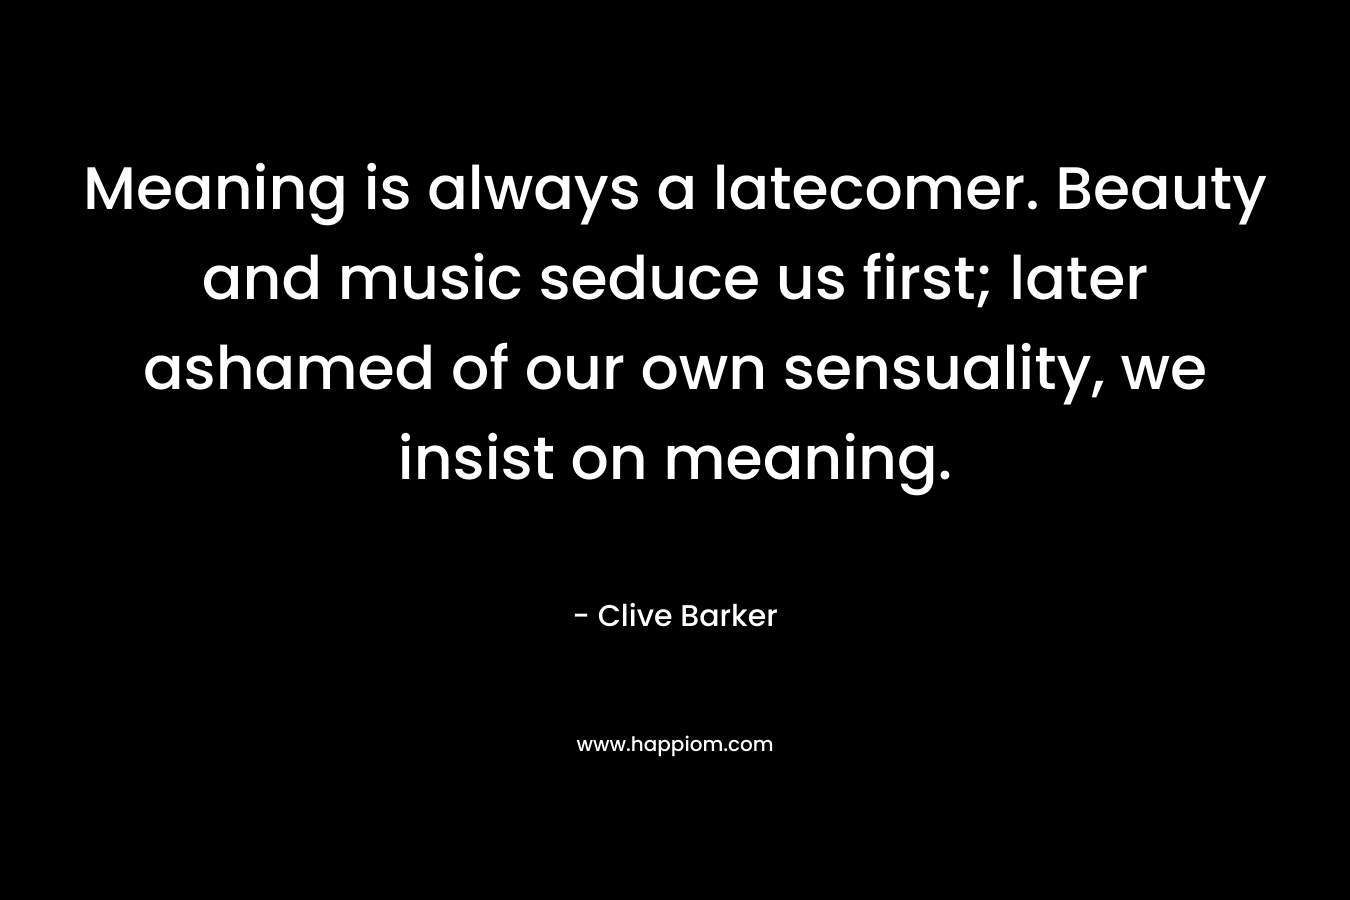 Meaning is always a latecomer. Beauty and music seduce us first; later ashamed of our own sensuality, we insist on meaning. – Clive Barker